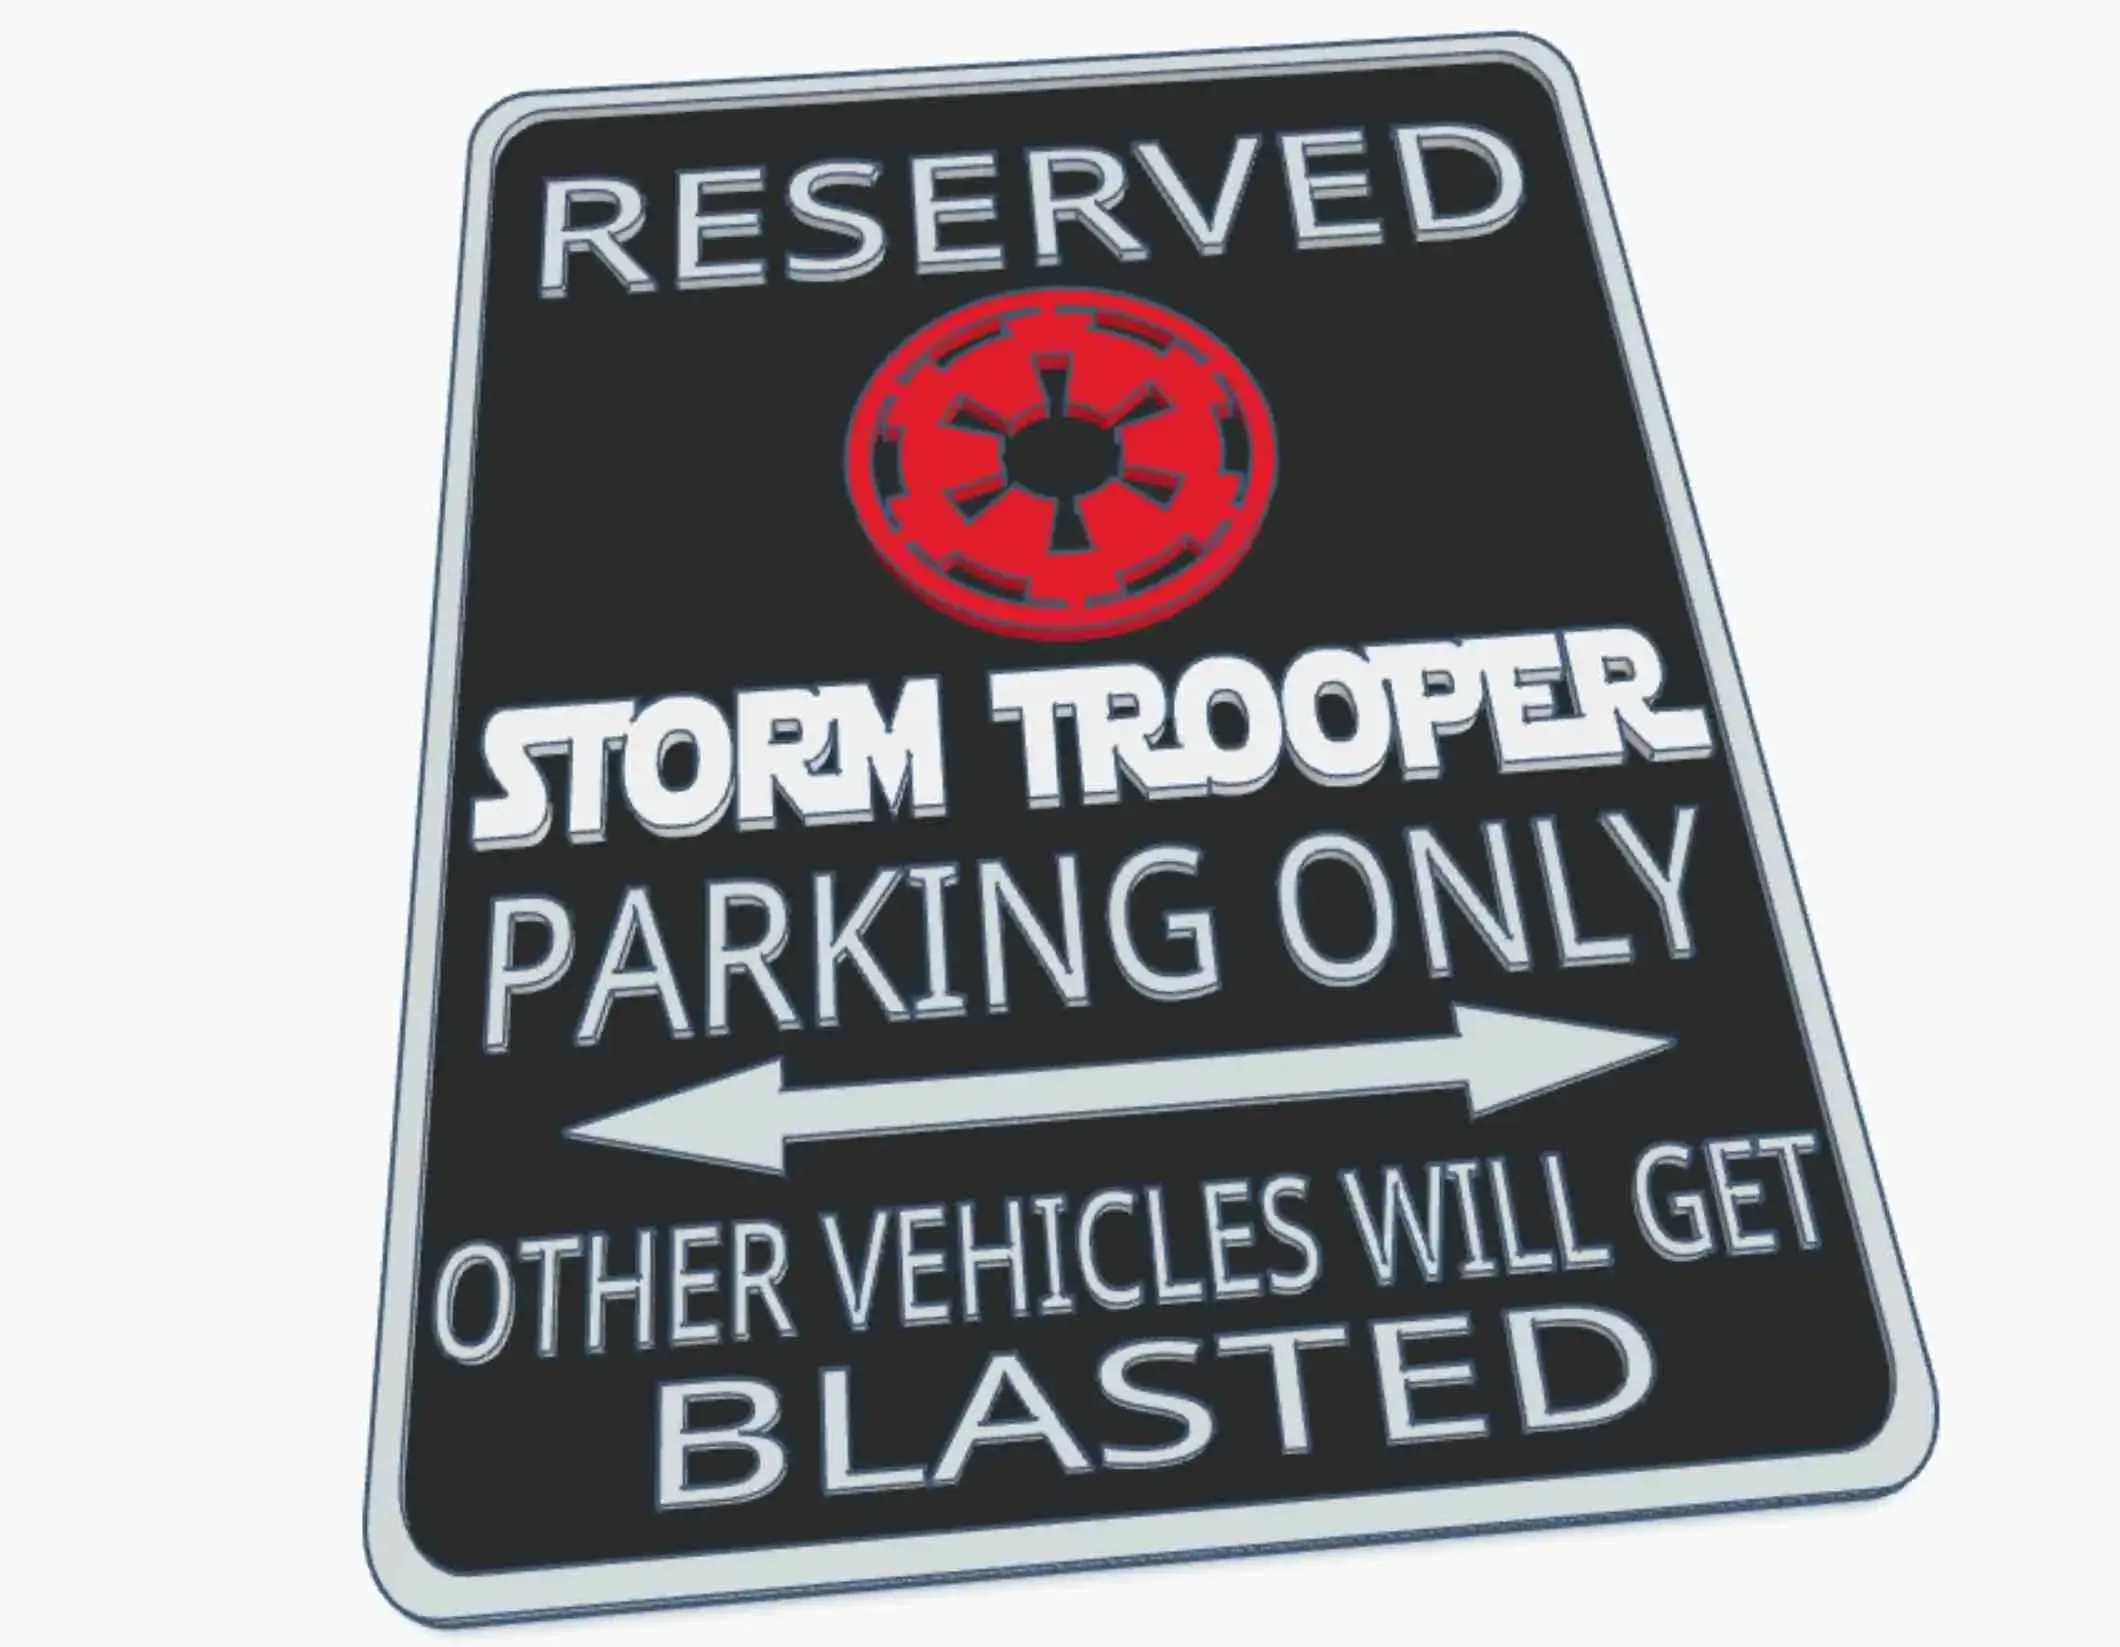 Storm Trooper Empire Imperial Star Wars Parking Warning Sign